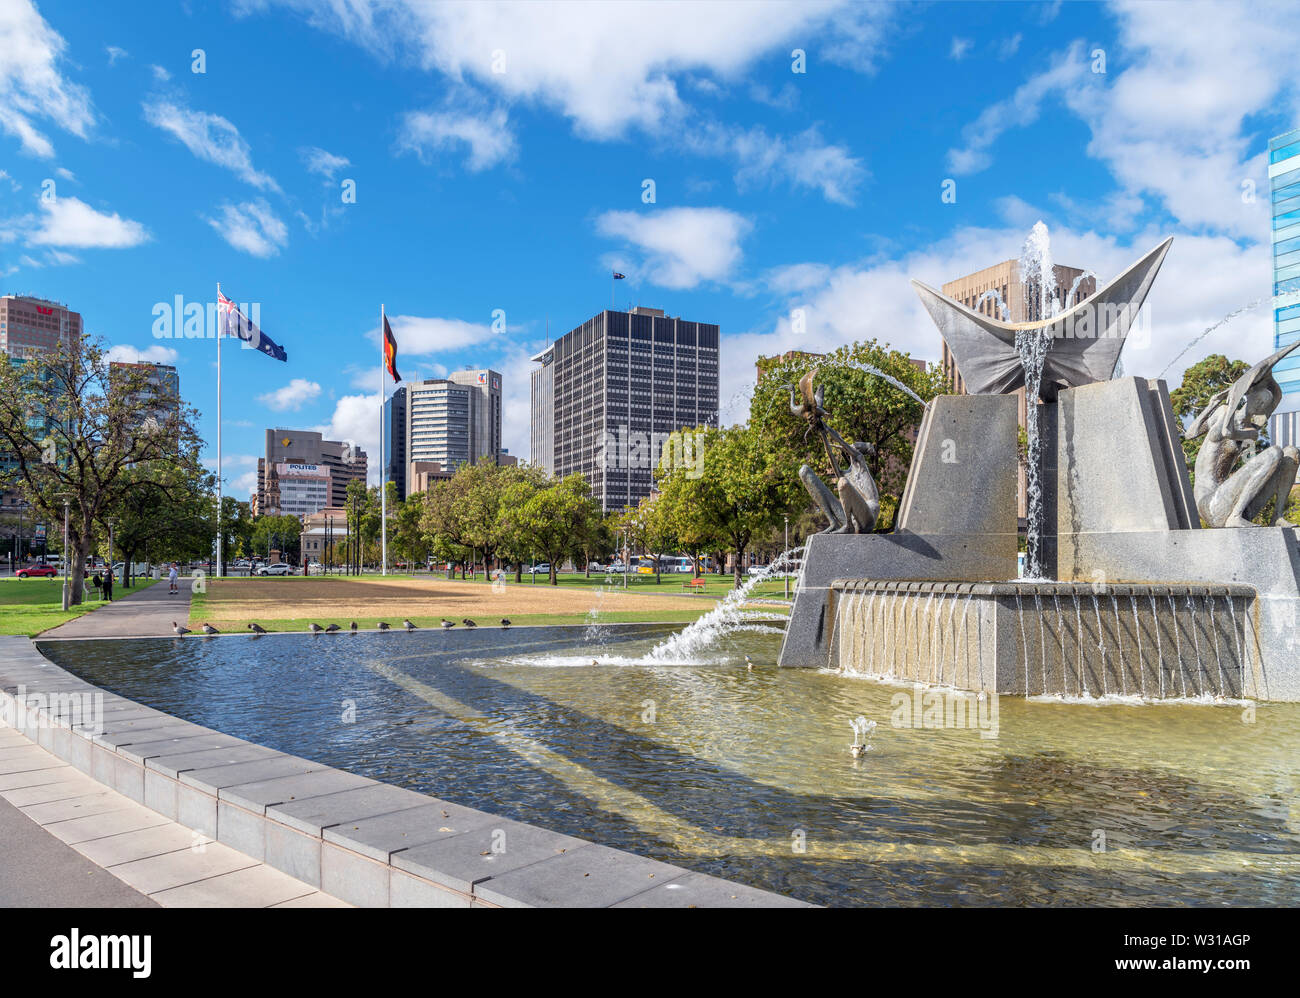 Victoria Square with the Three Rivers Fountain in the foreground, Central Business District (CBD), Adelaide, South Australia, Australia Stock Photo